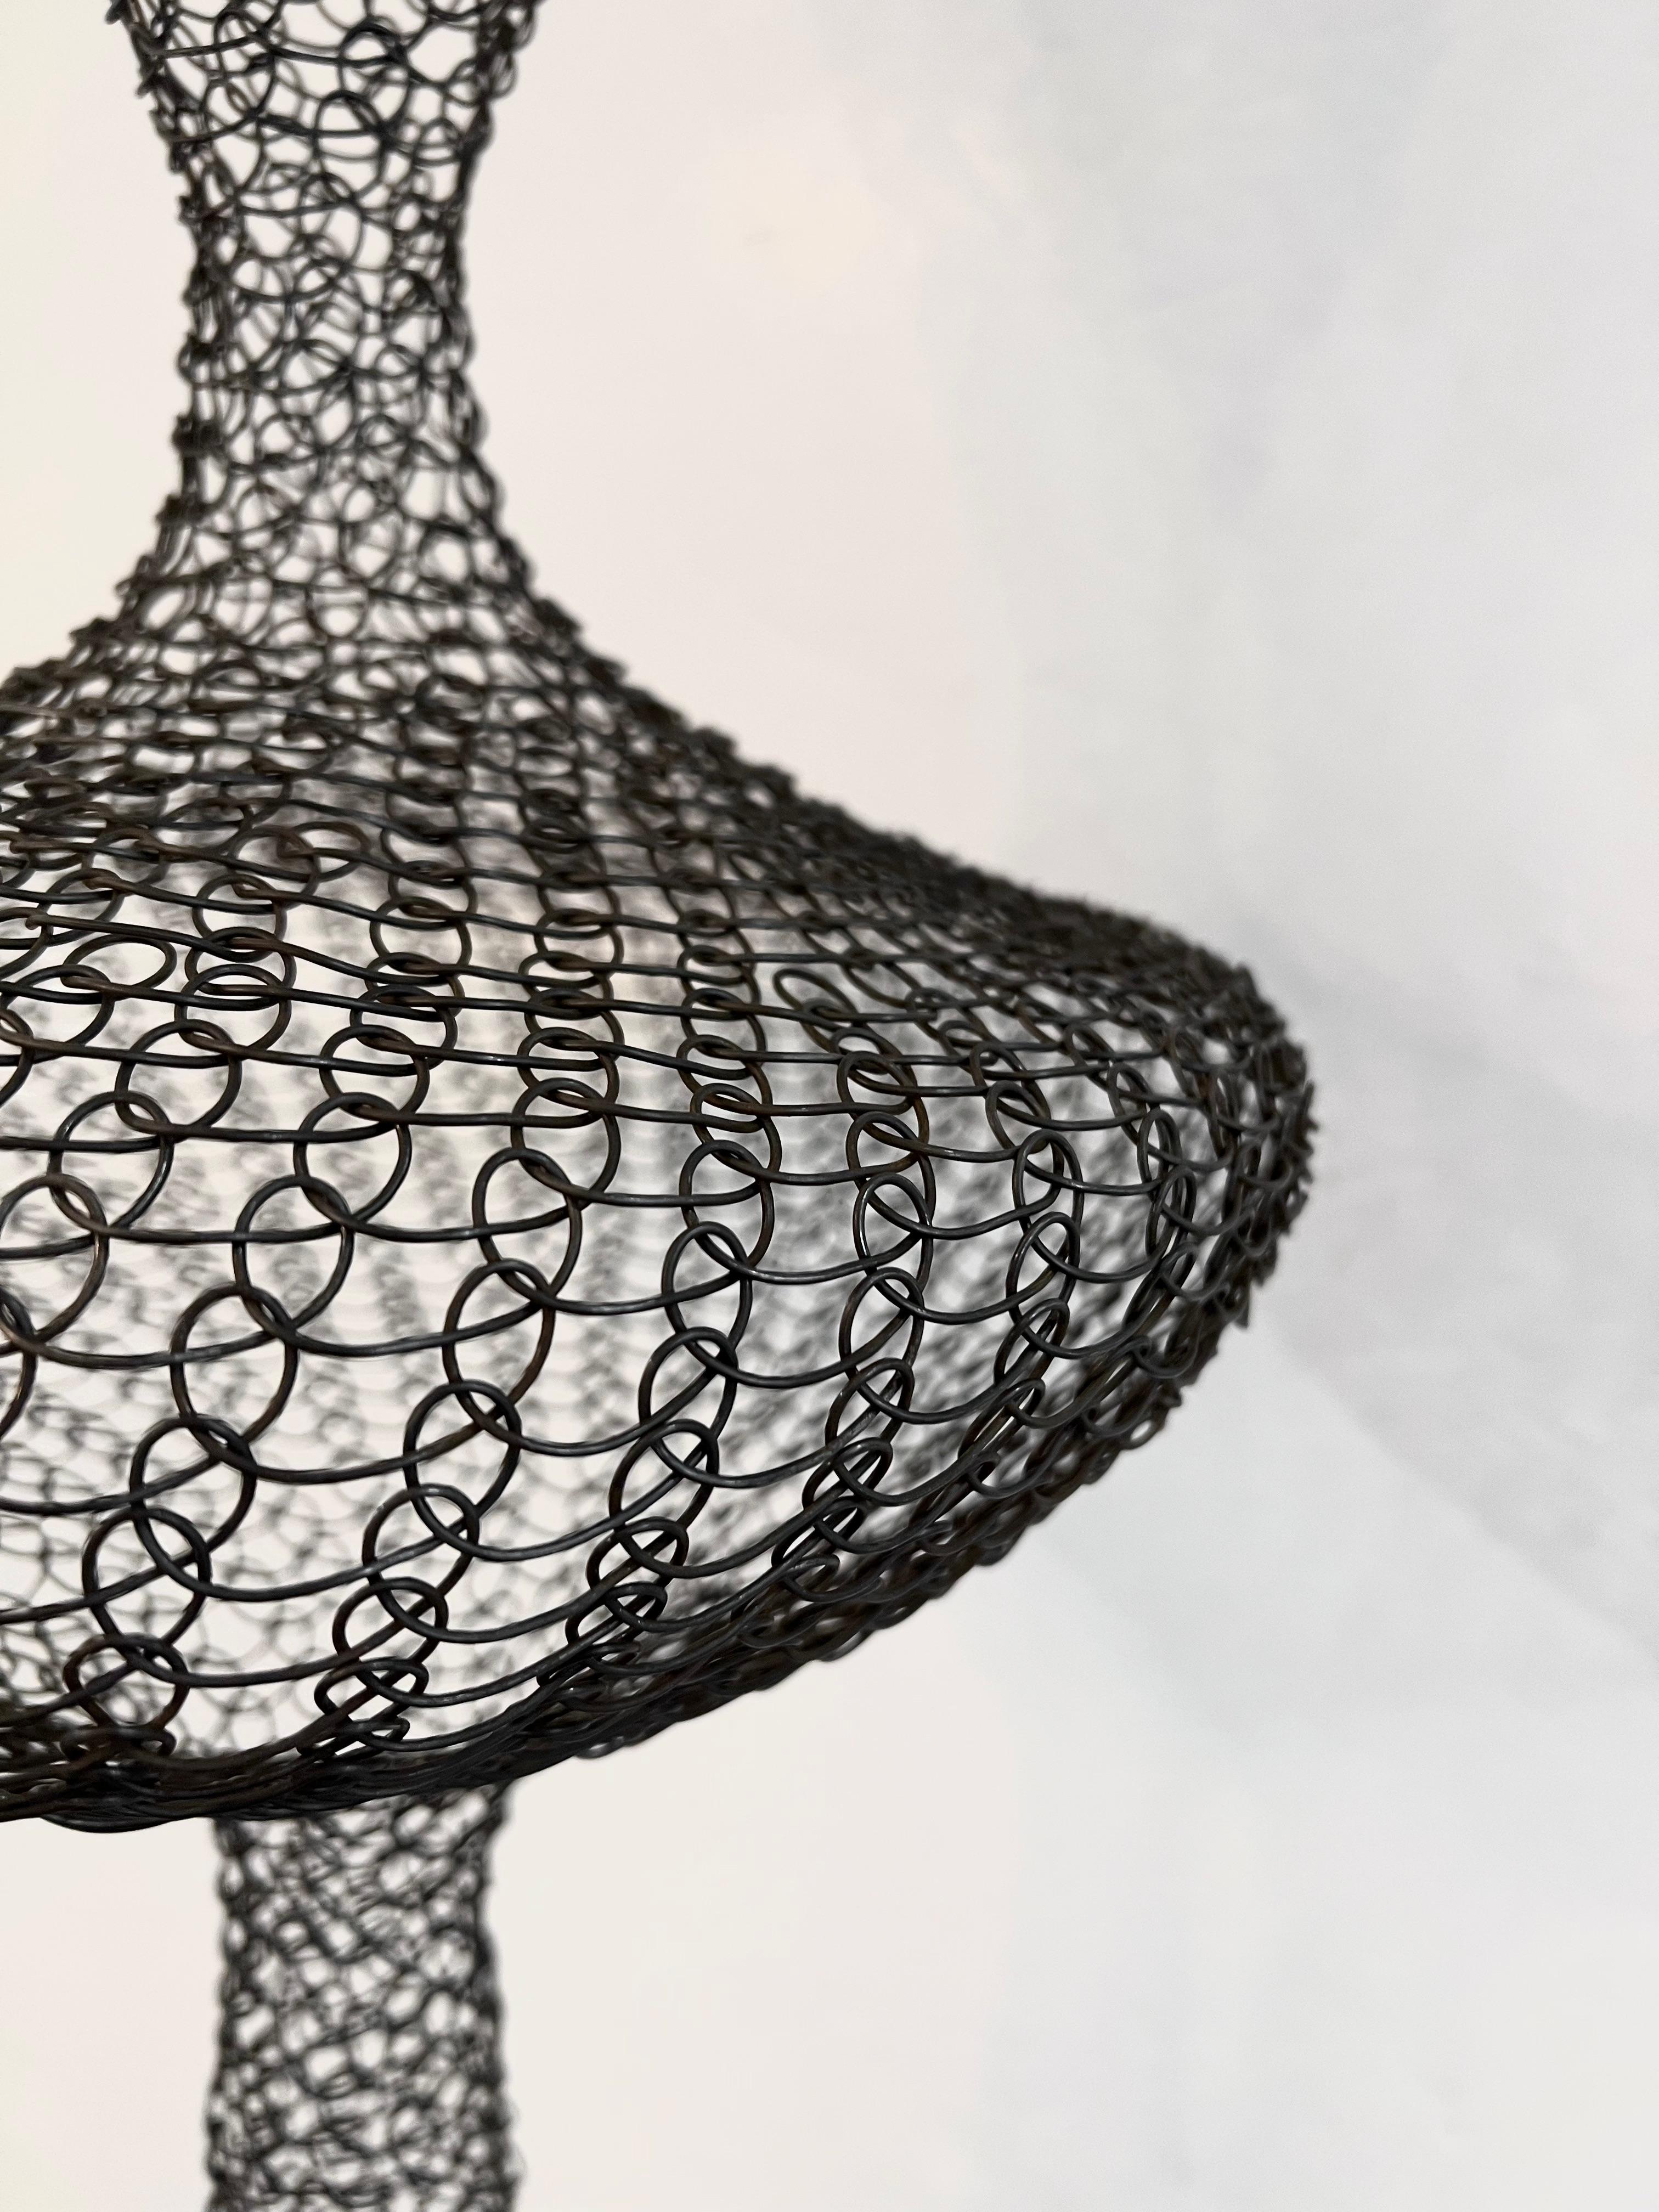 Organic Woven Mesh Wire Sculpture by Ulrikk Dufosse For Sale 3